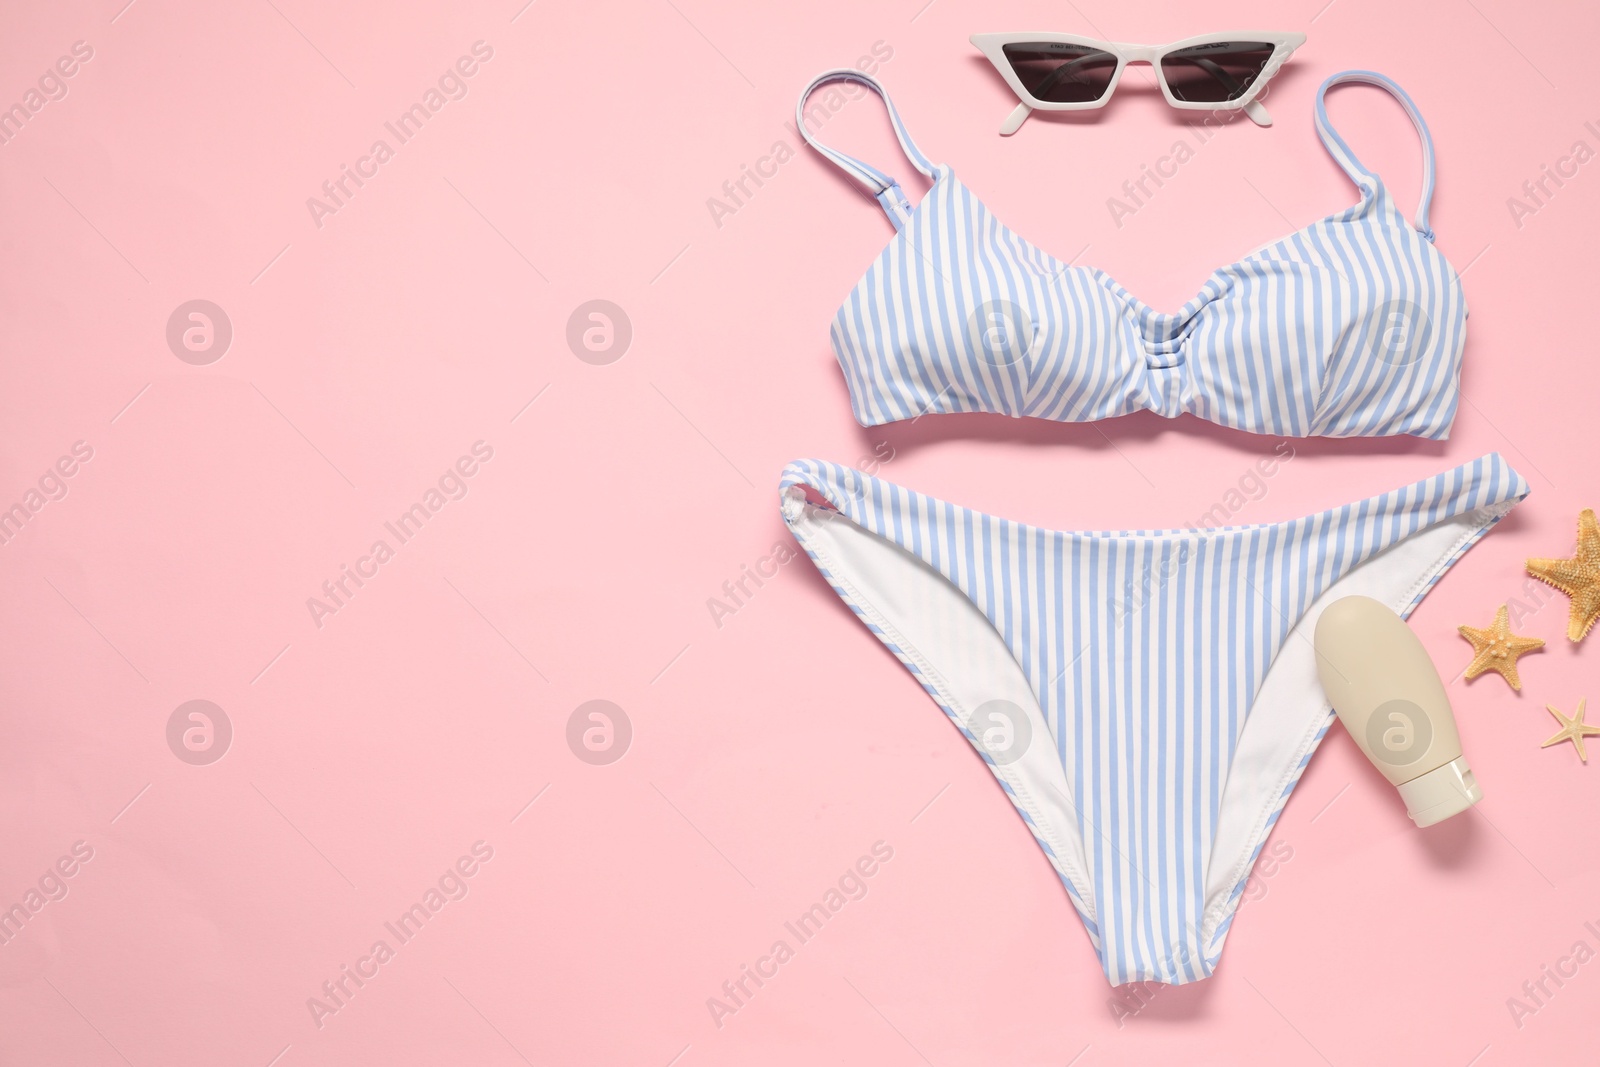 Photo of Striped swimsuit, sunscreen, sunglasses and starfishes on pink background, flat lay. Space for text